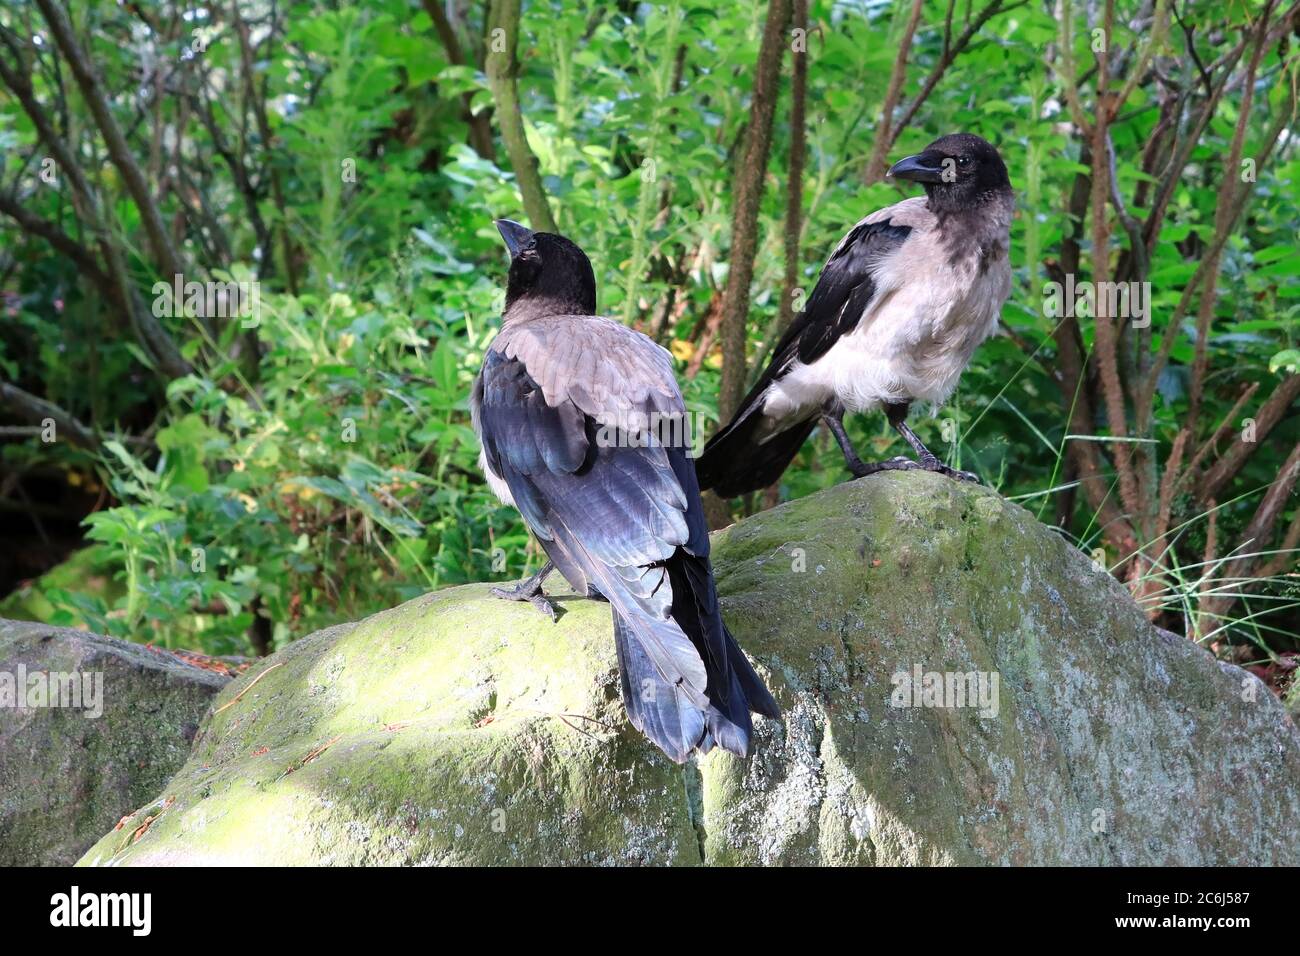 Two young Hooded Crows, Corvus cornix standing on a rock, exploring their environment. Young crows examine their surroundings with much curiosity. Stock Photo